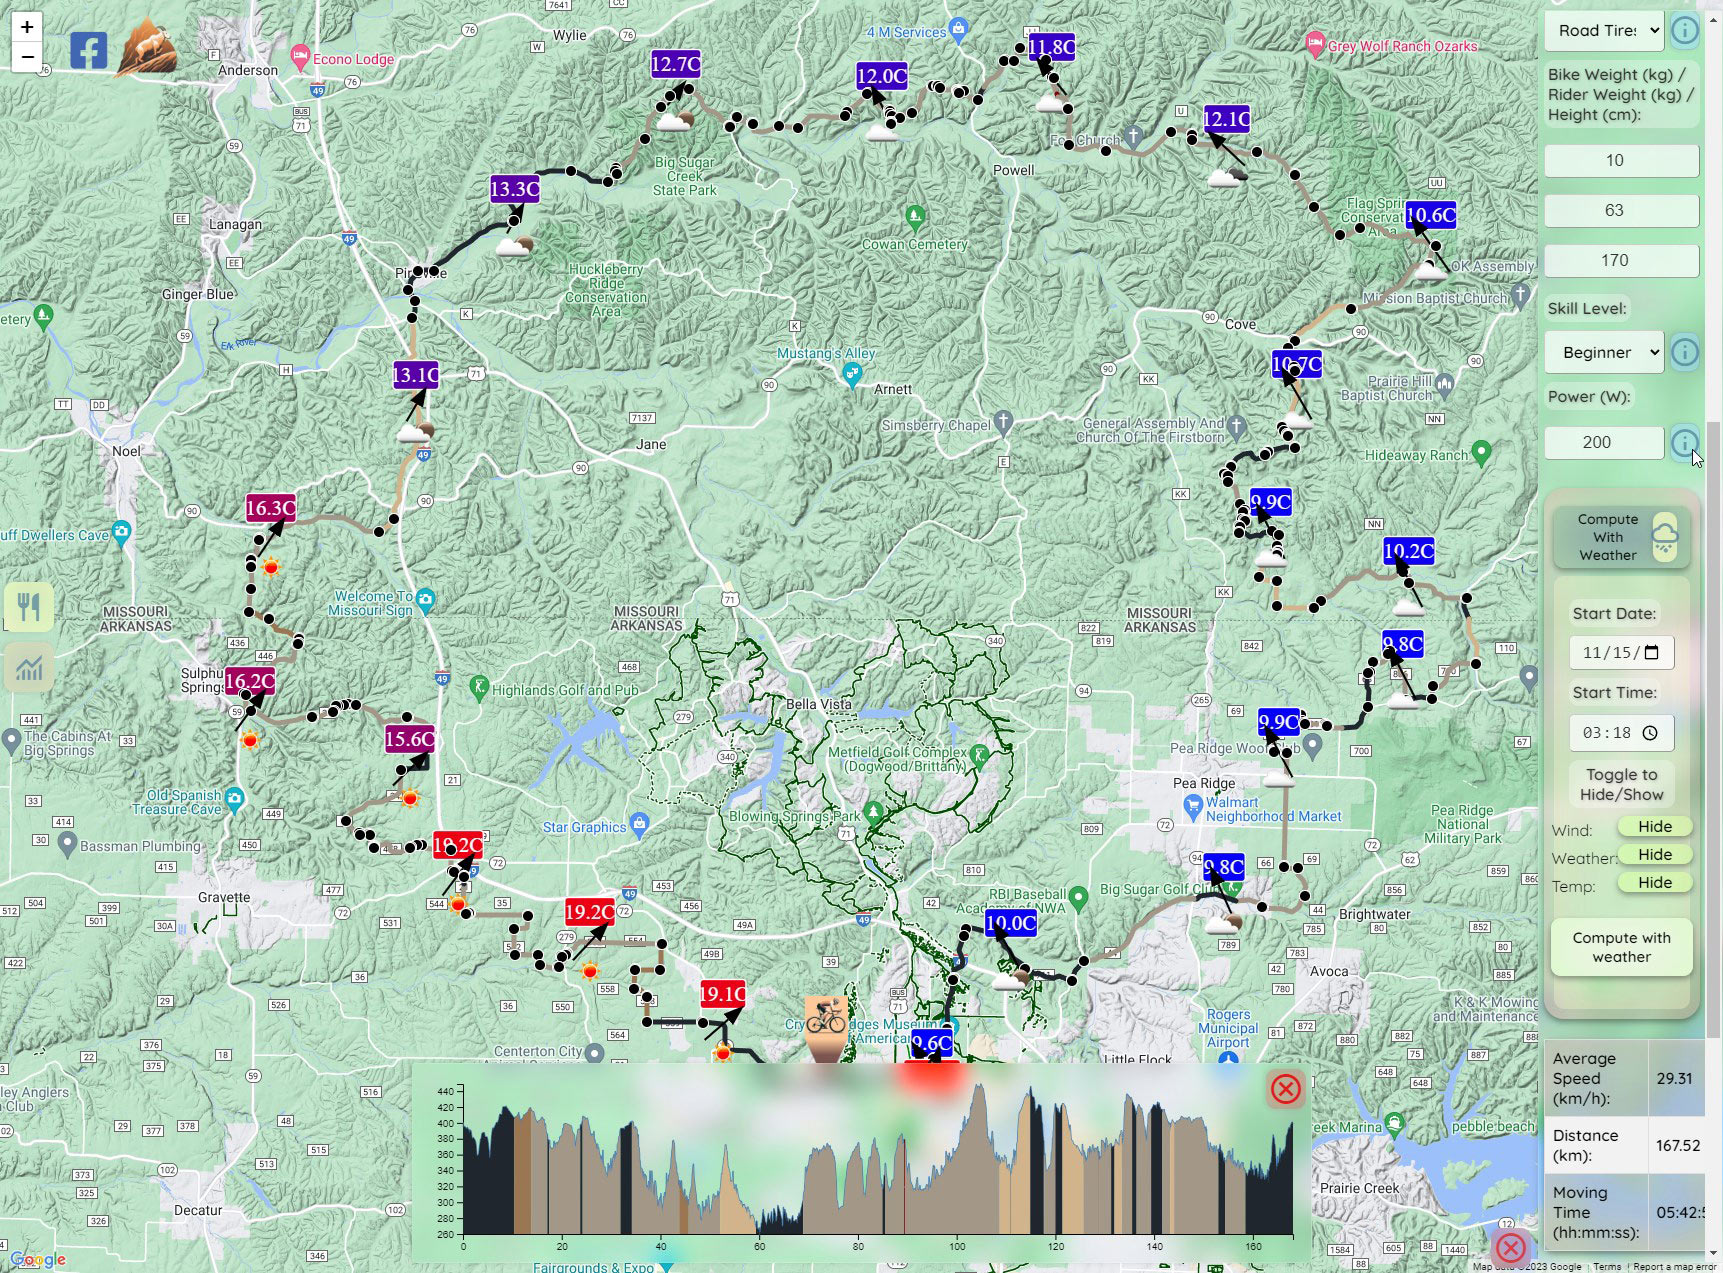 sherpa map route calculator will show weather, headwinds, and make tire size and nutrition recommendations